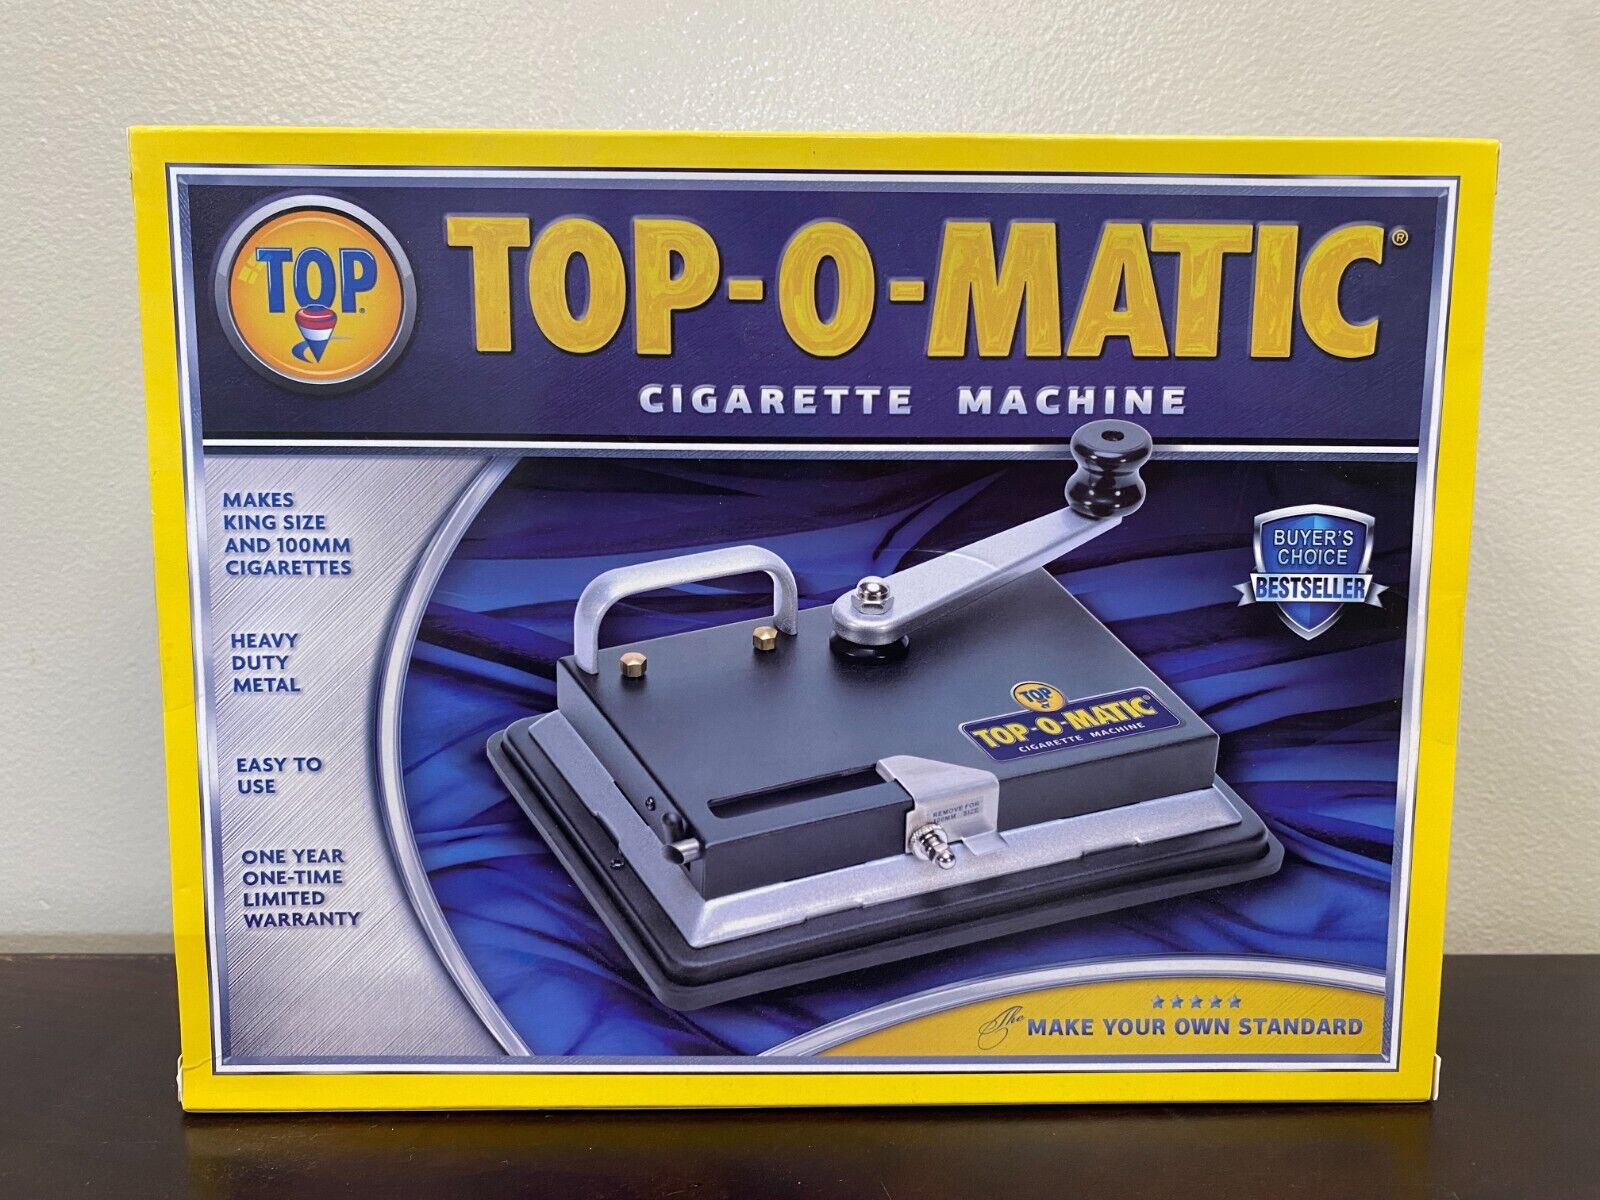 TOP-O-MATIC CIGARETTE MACHINE💚MAKES KING SIZE AND 100MM~SALE